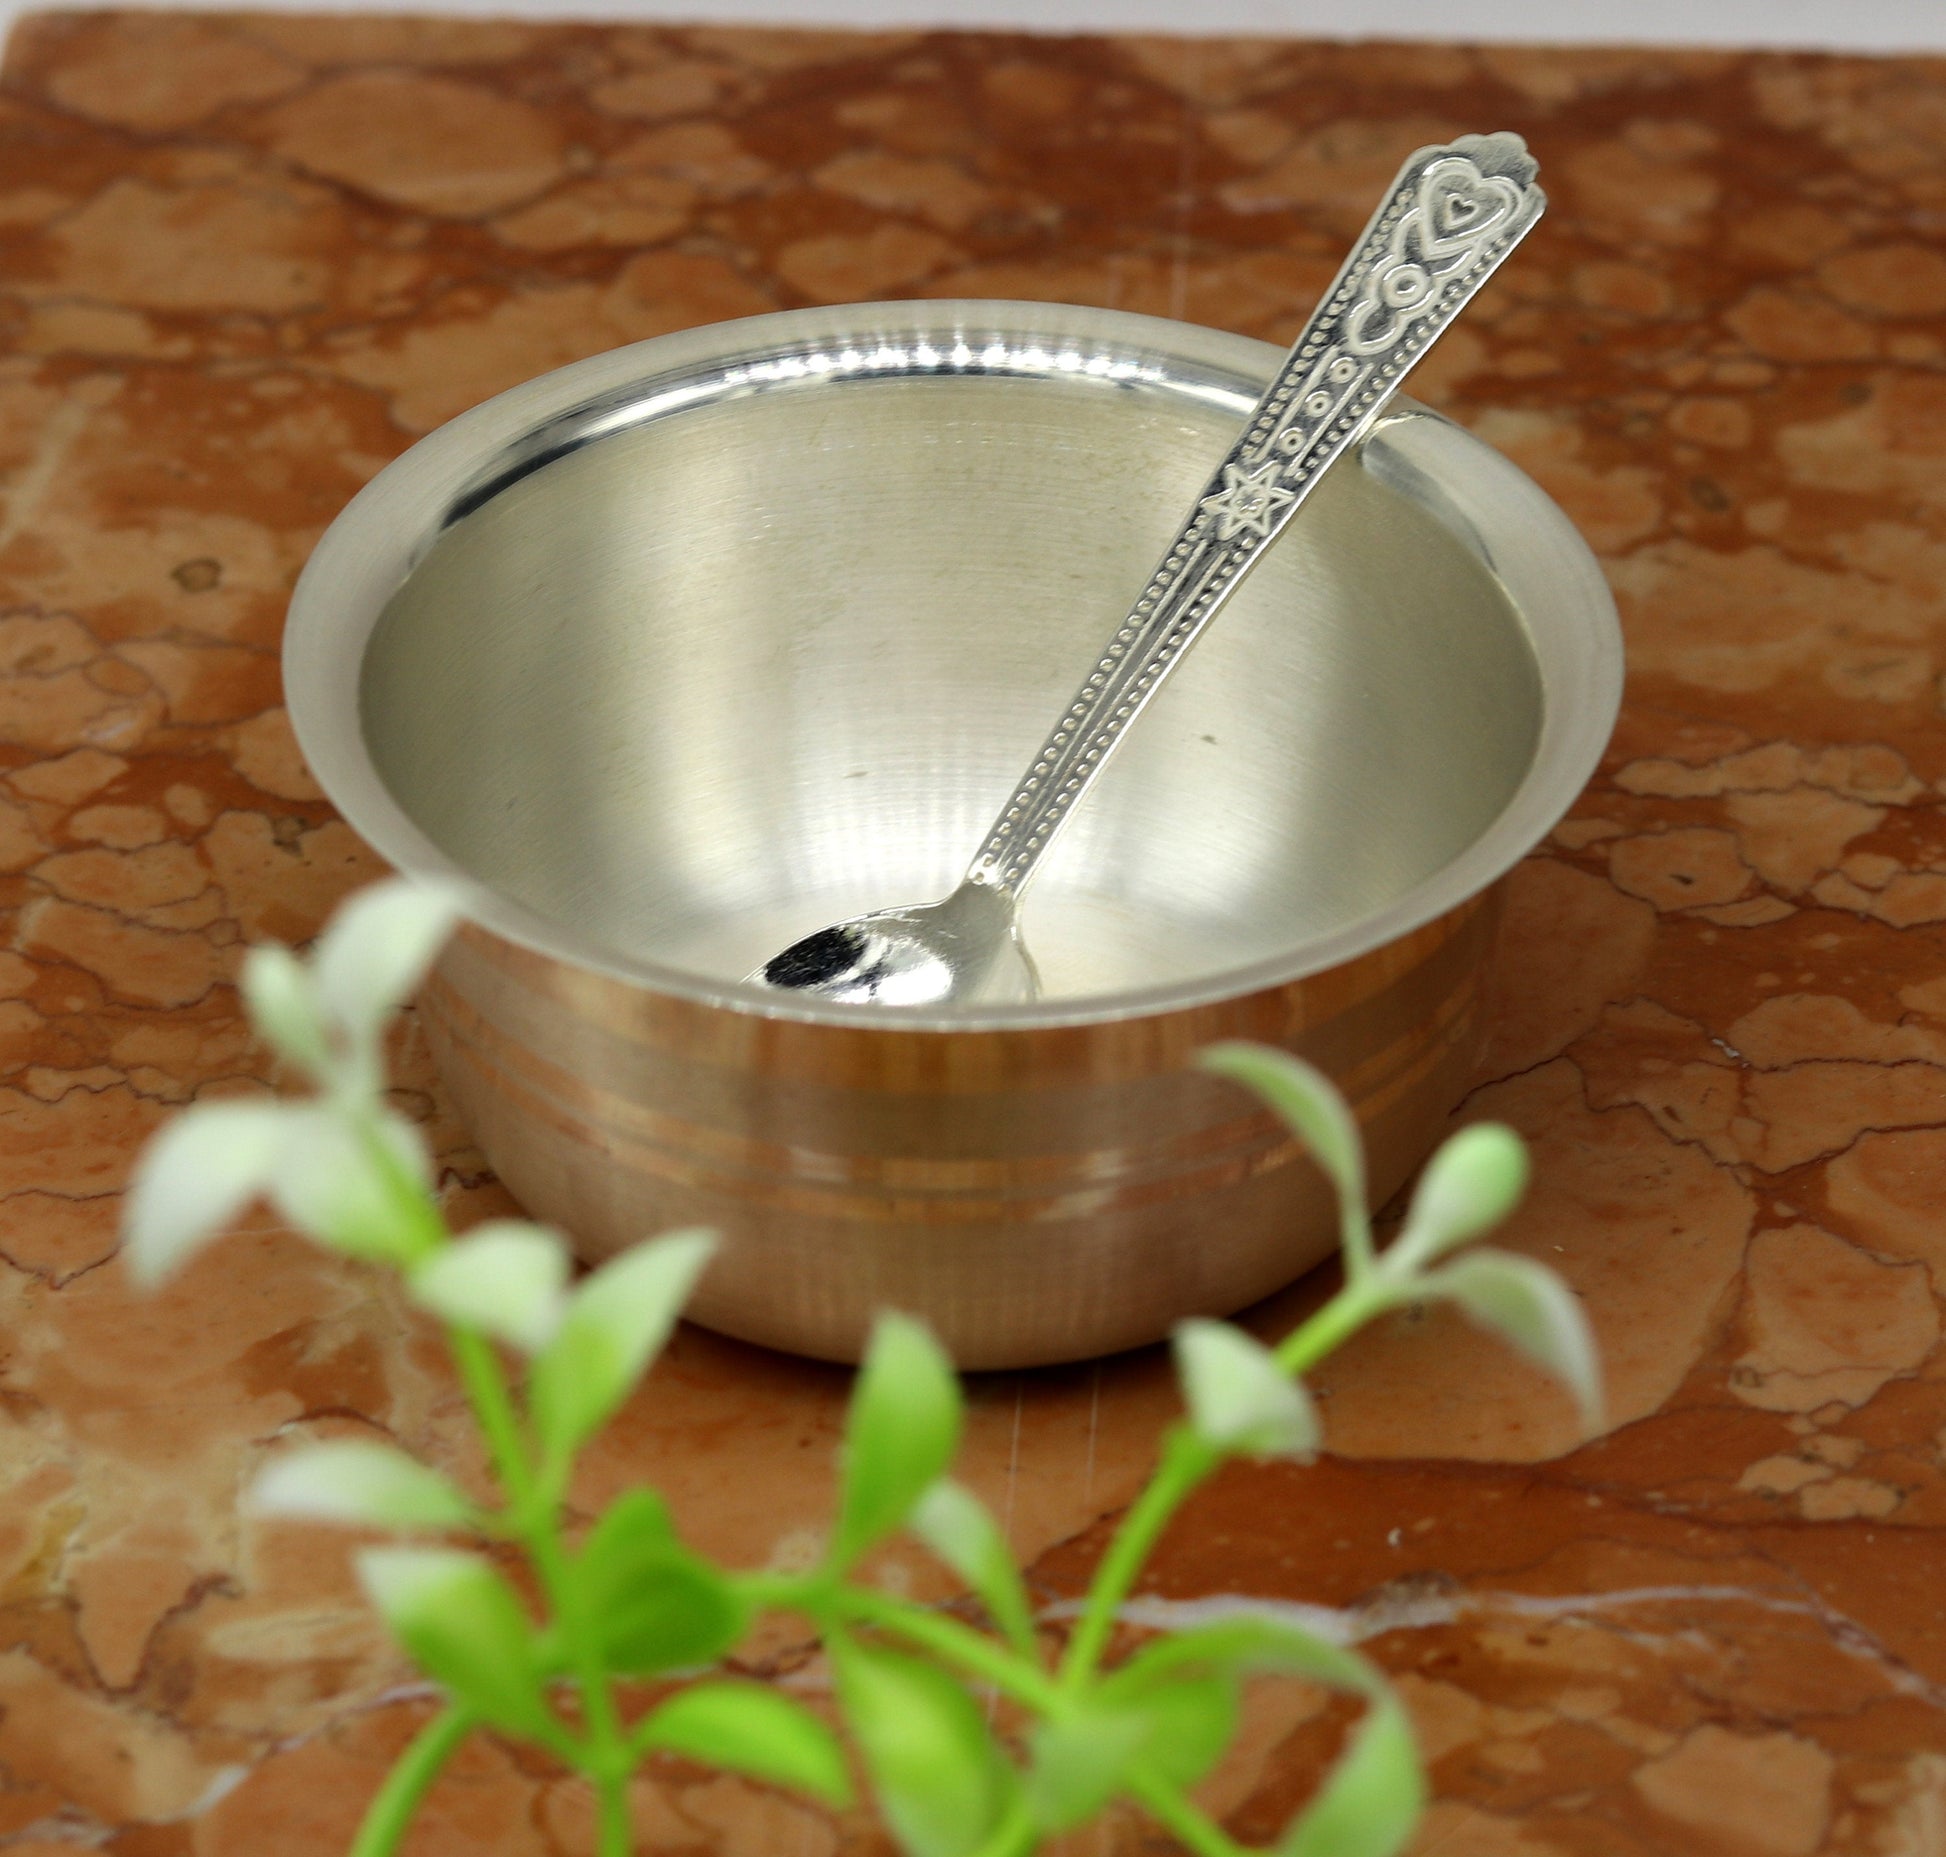 999 pure sterling silver handmade solid silver bowl and spoon, silver has antibacterial properties, keep stay healthy, silver vessels sv63 - TRIBAL ORNAMENTS